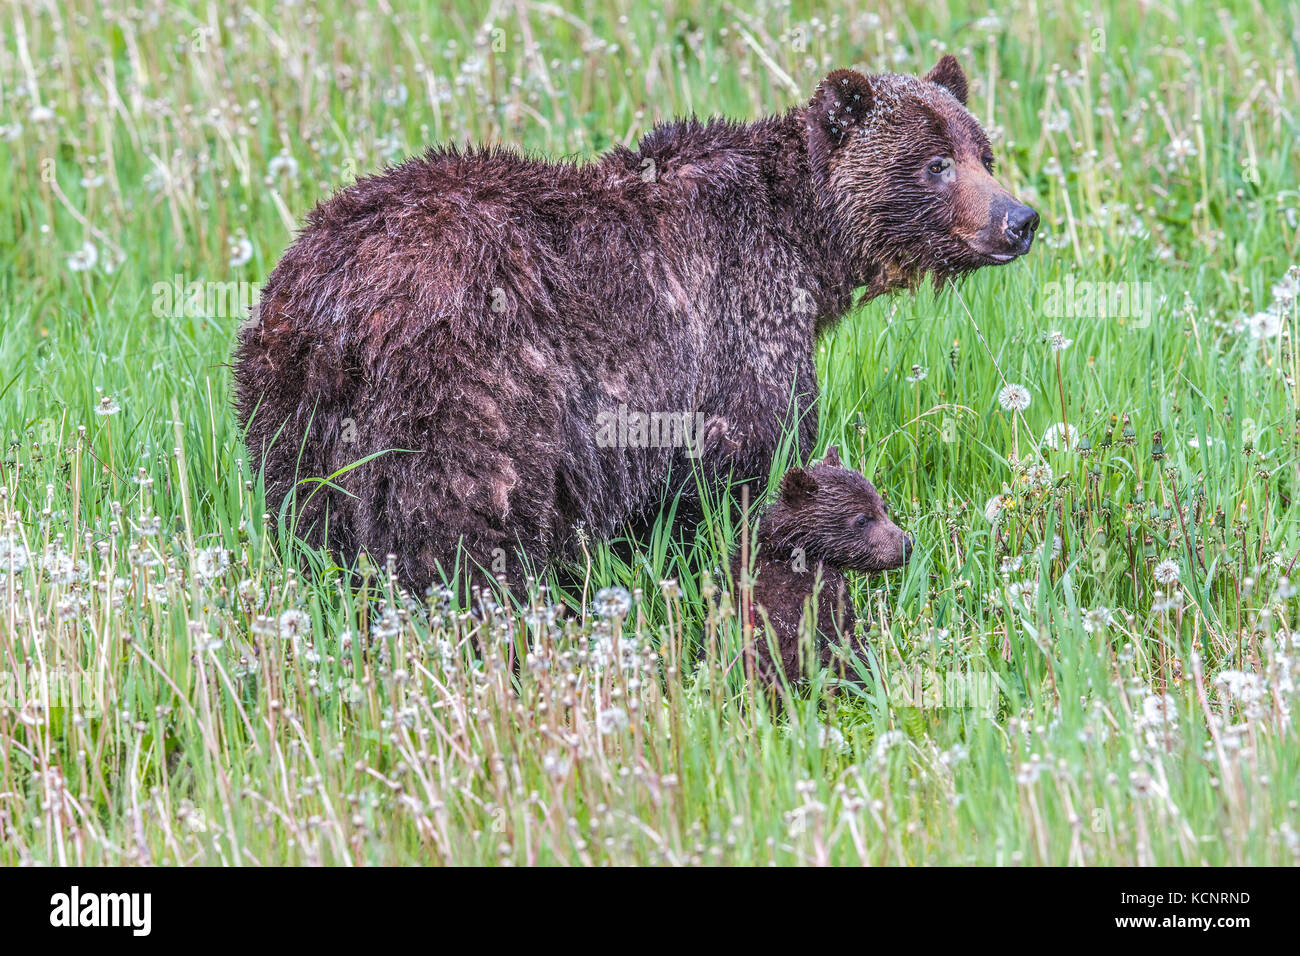 Grizzly Bear Male (Ursus arctos horribilis) Male grizzly bear, feeding in a moutain meadow, on dandelions. Kananaskis, Alberta, Canada Stock Photo